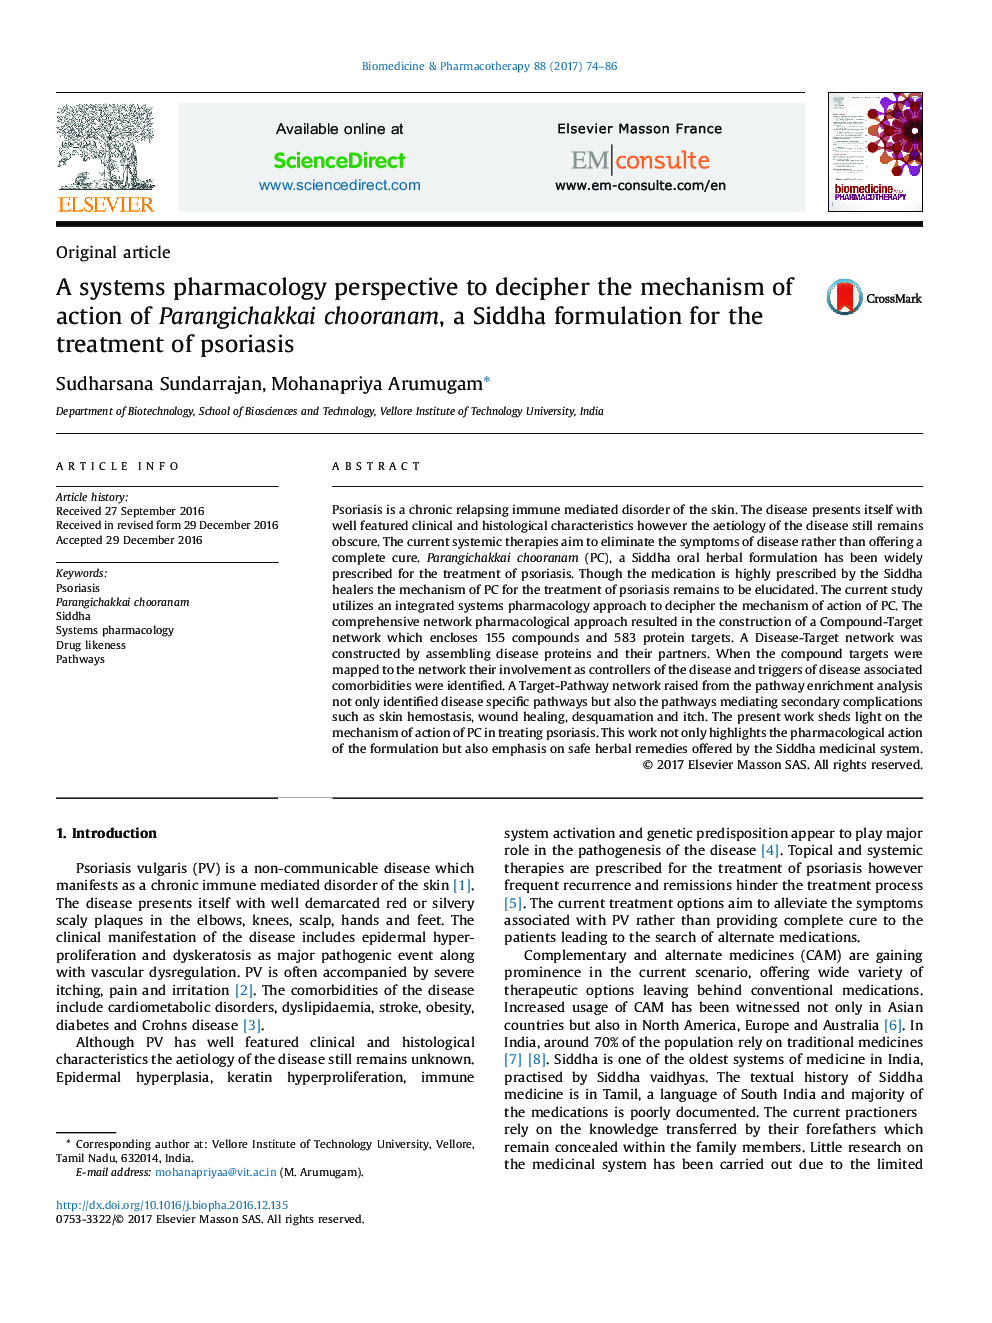 A systems pharmacology perspective to decipher the mechanism of action of Parangichakkai chooranam, a Siddha formulation for the treatment of psoriasis